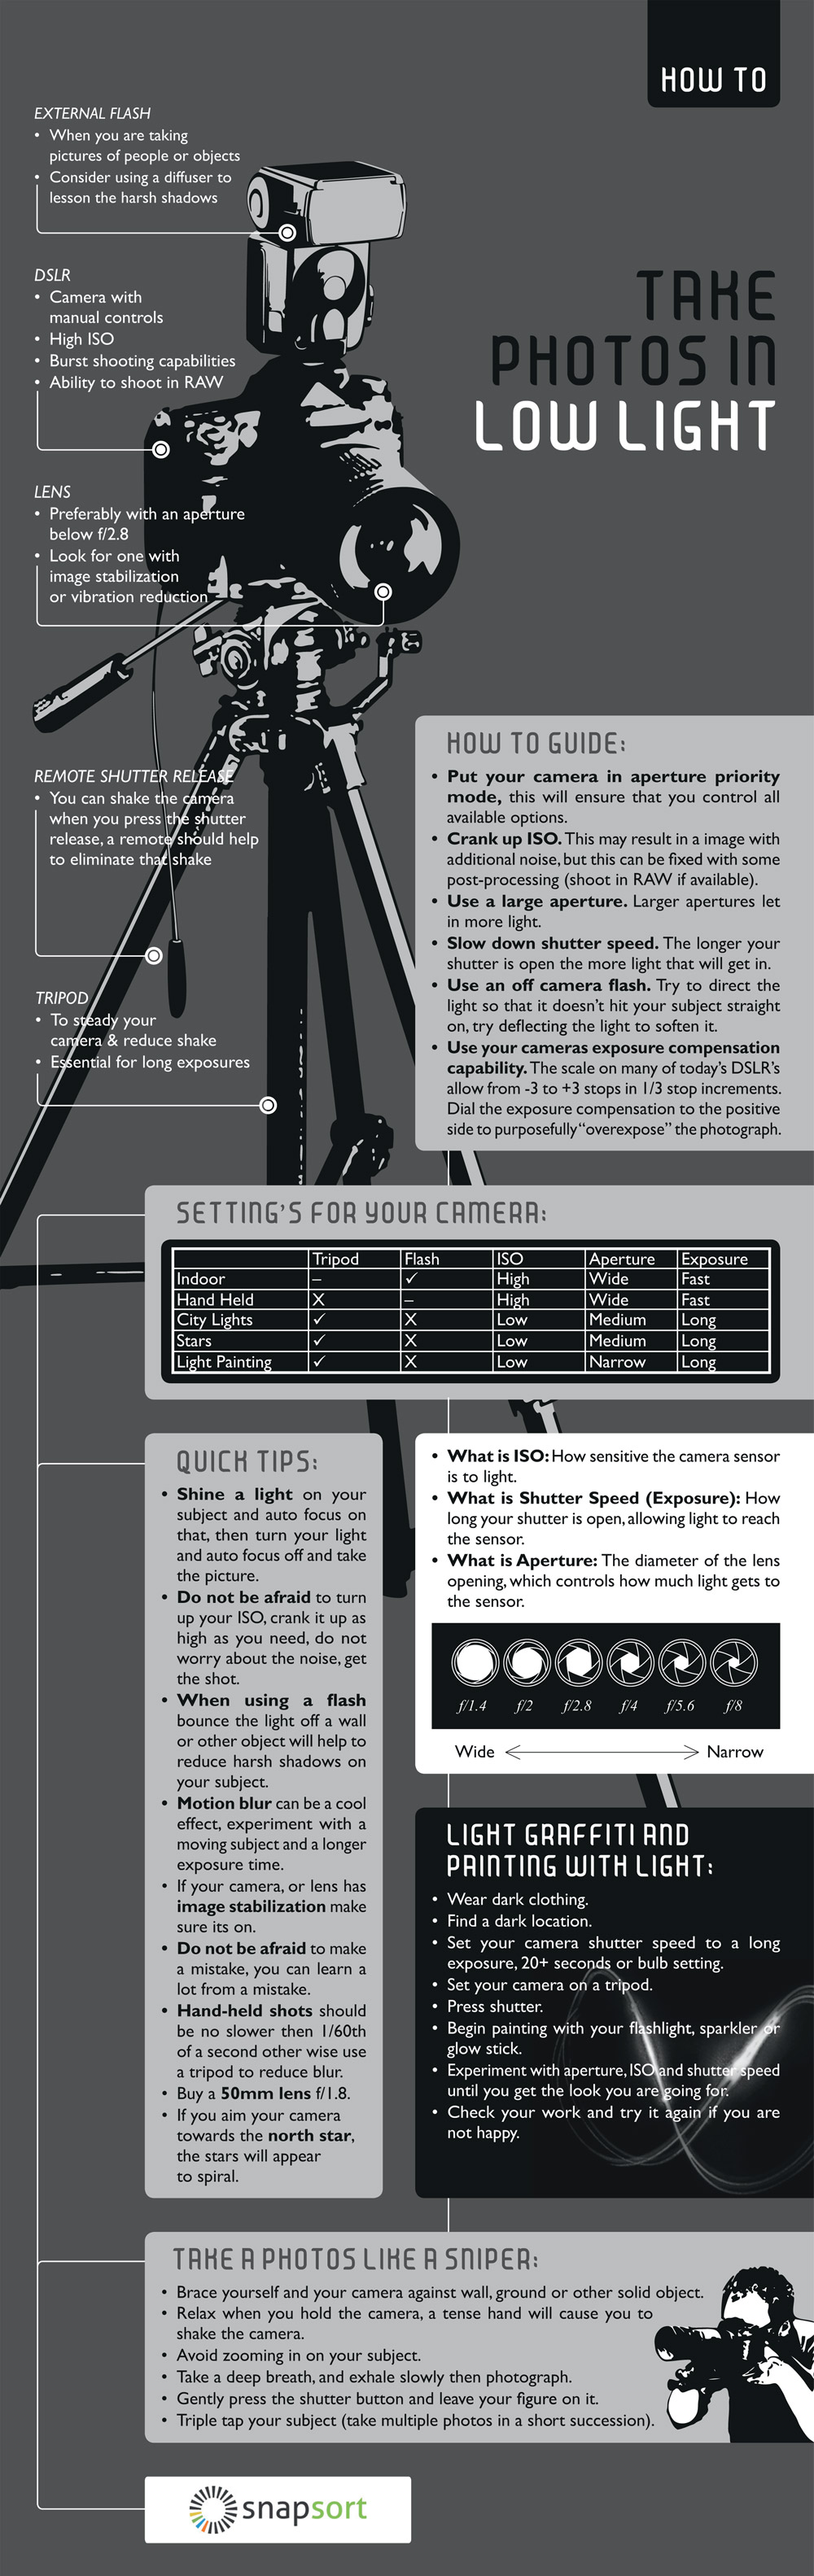 Ultimate Tips For Low Light Photography [Infographic]